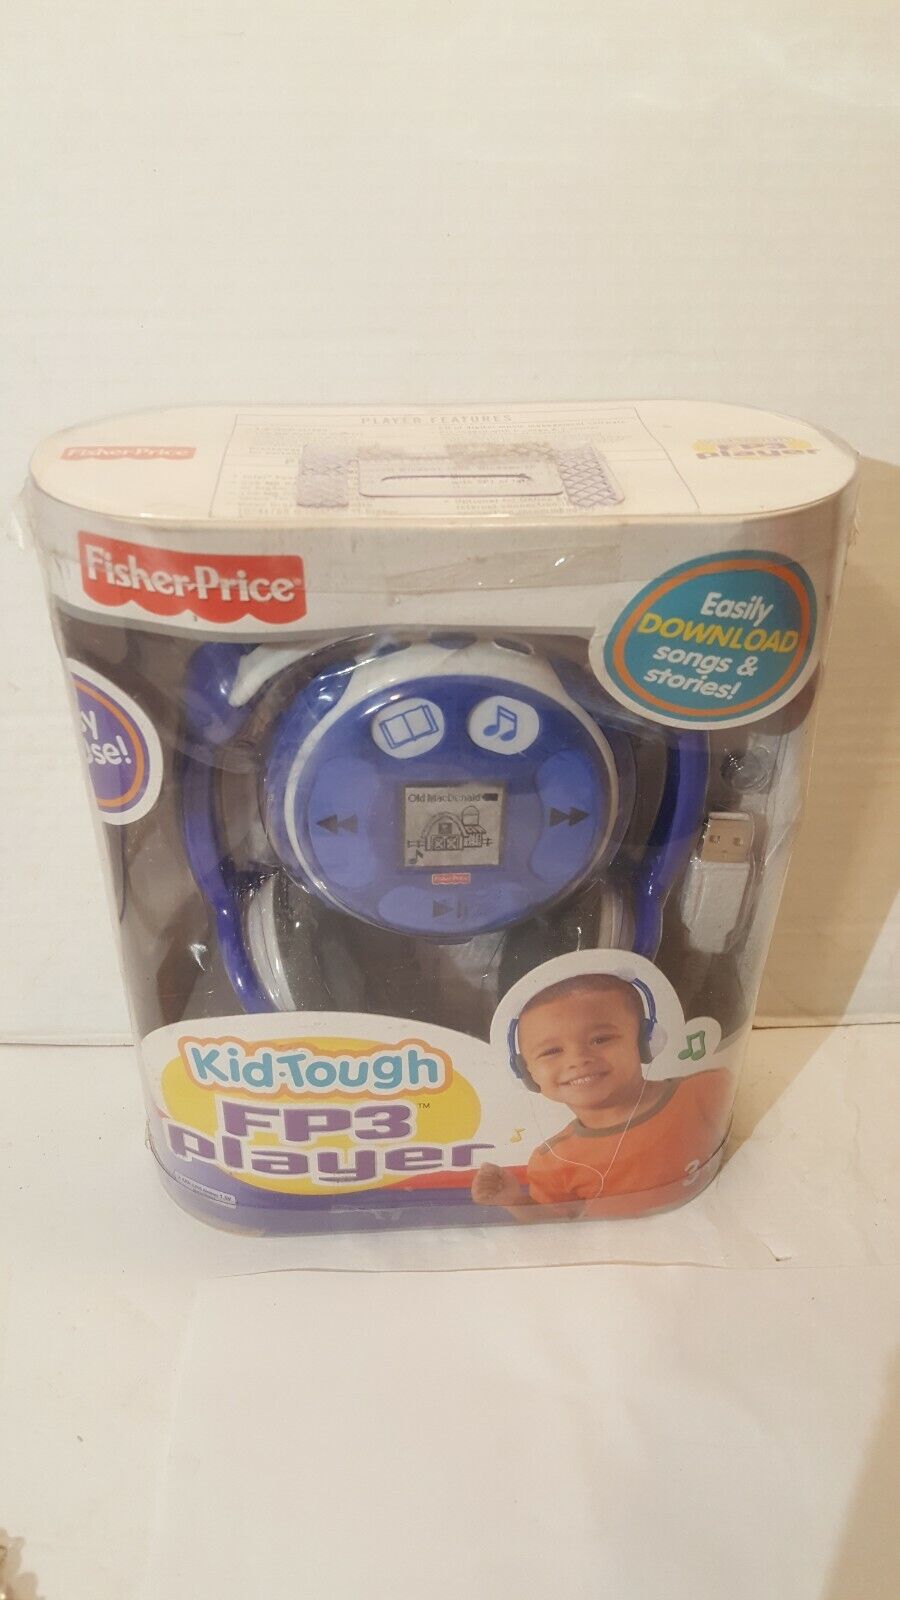 Fisher Price Kid Tough Blue Fp3 Player Easily Download Songs & Stories Open Box